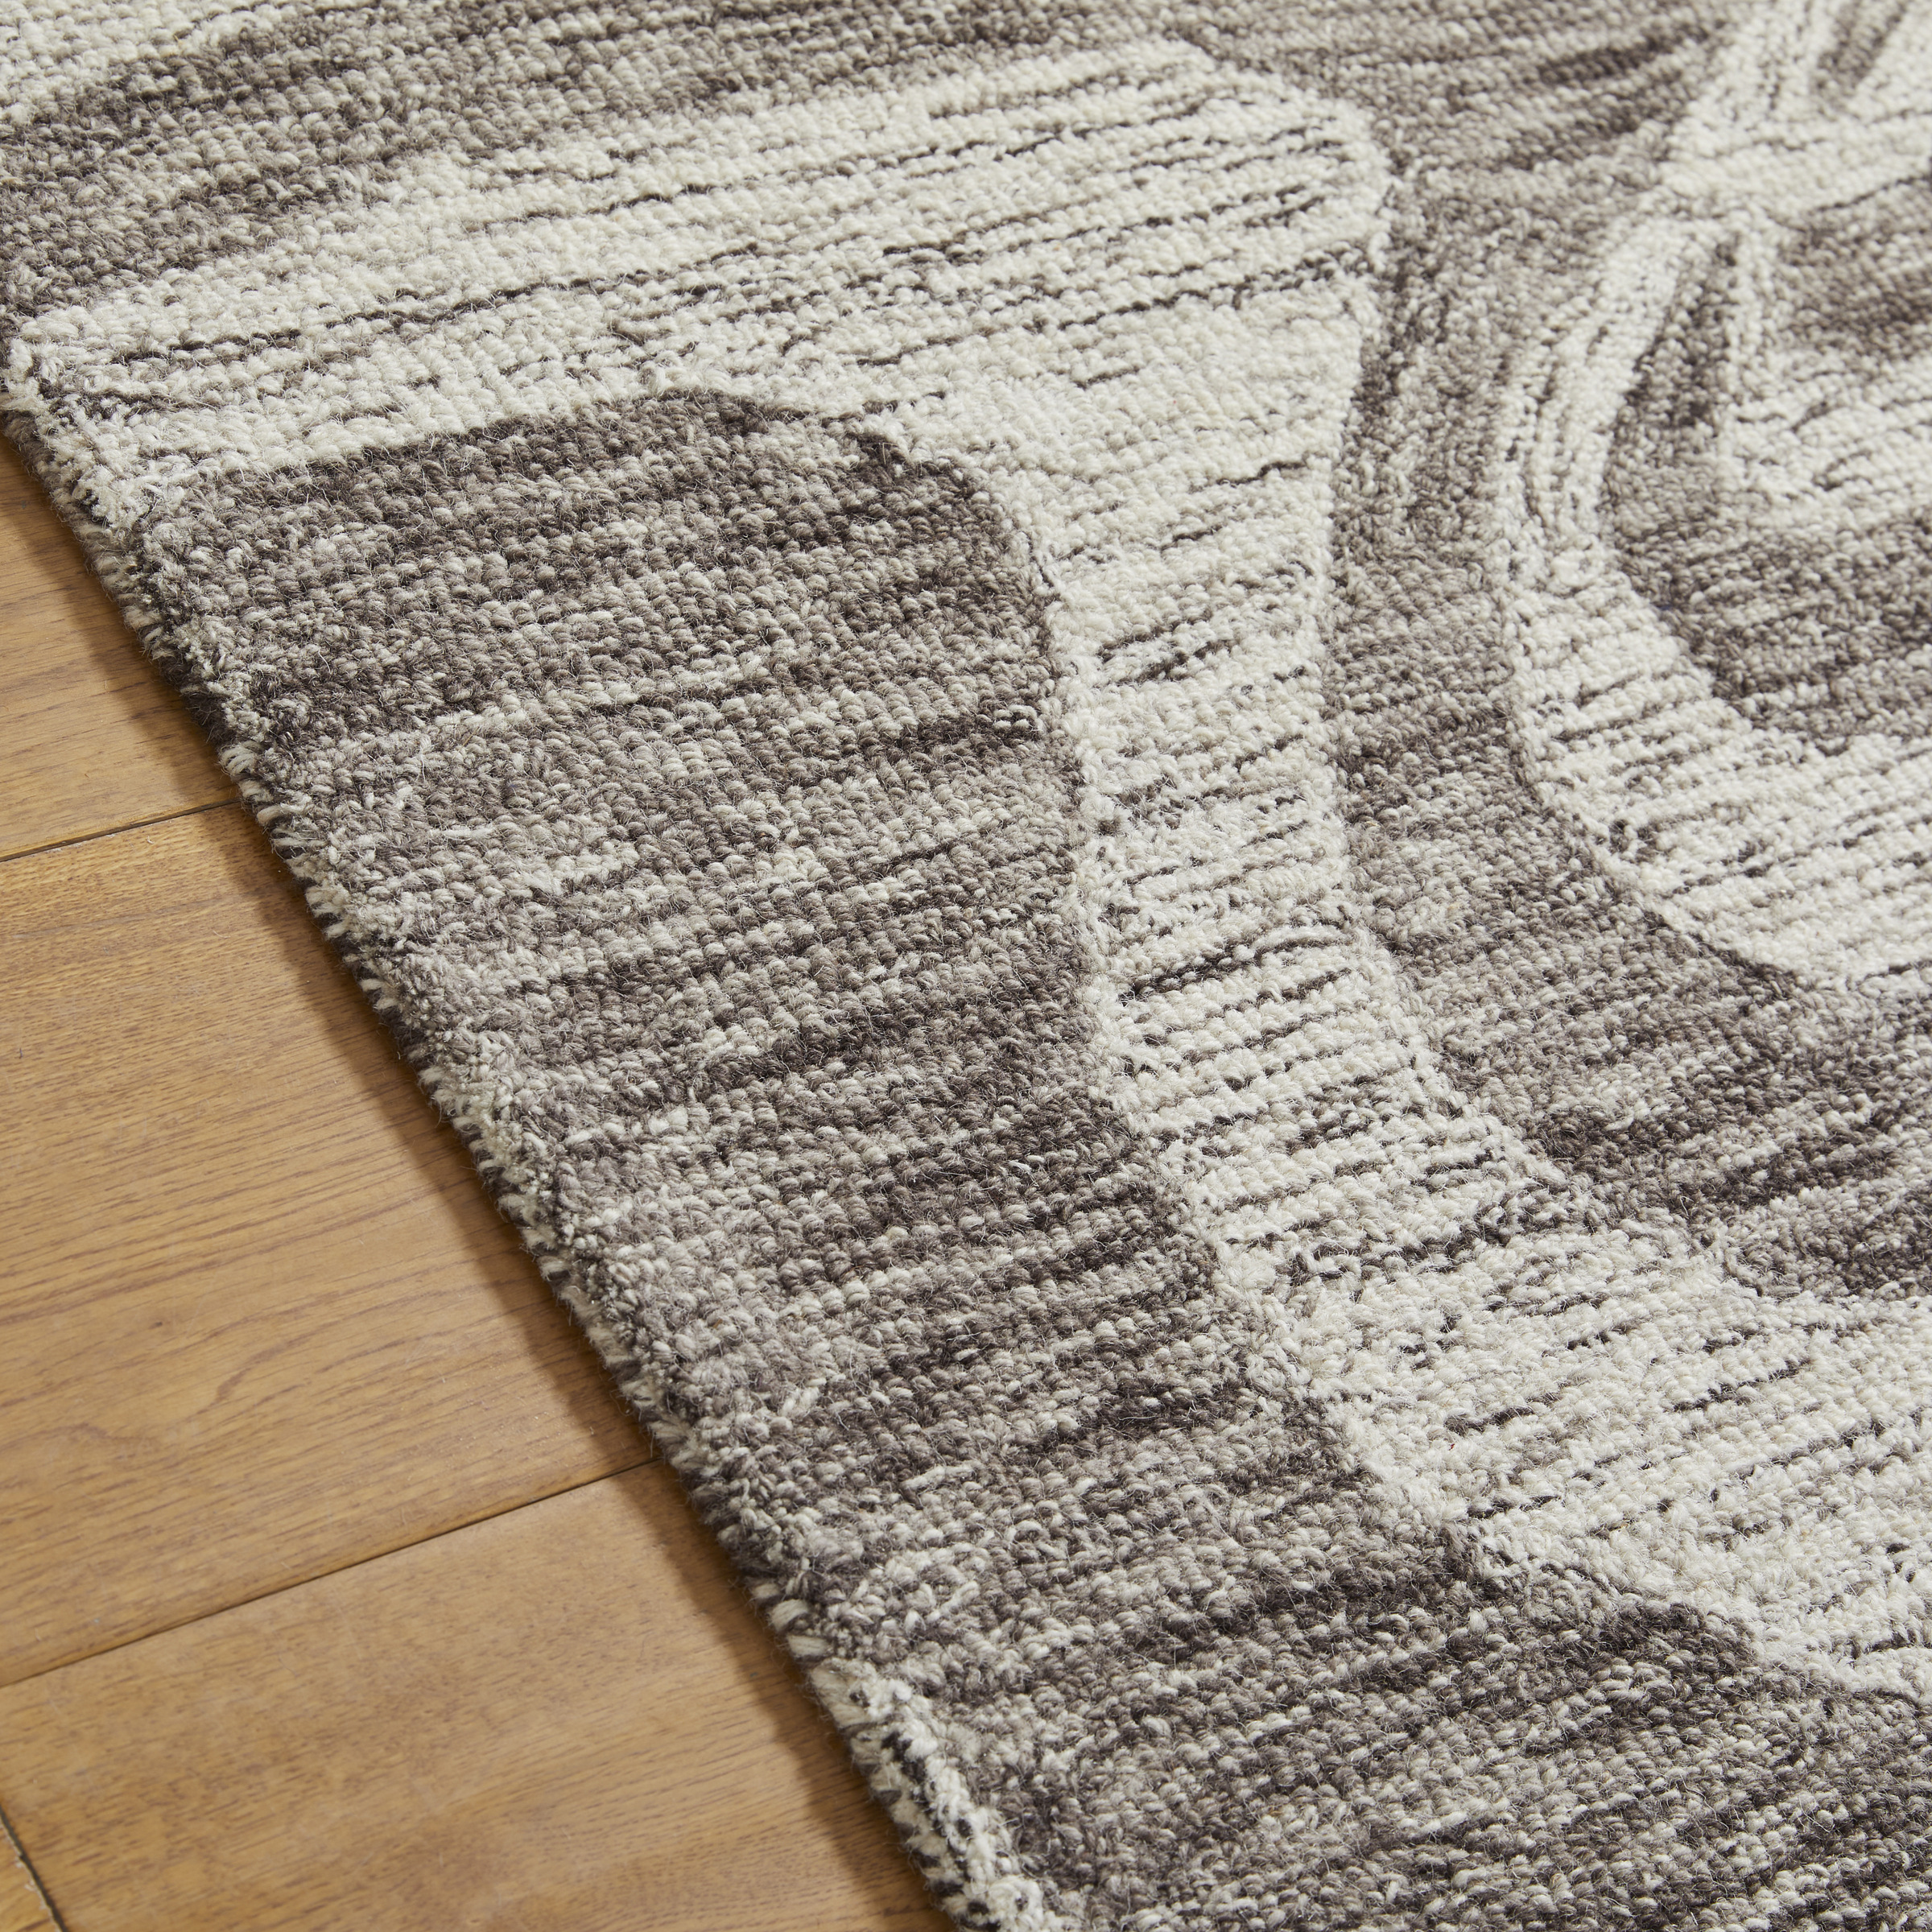 Contemporary Cream Brown Rug | Elements Cycle | 120 x 170cm Wool UK Mainland Free Shipping